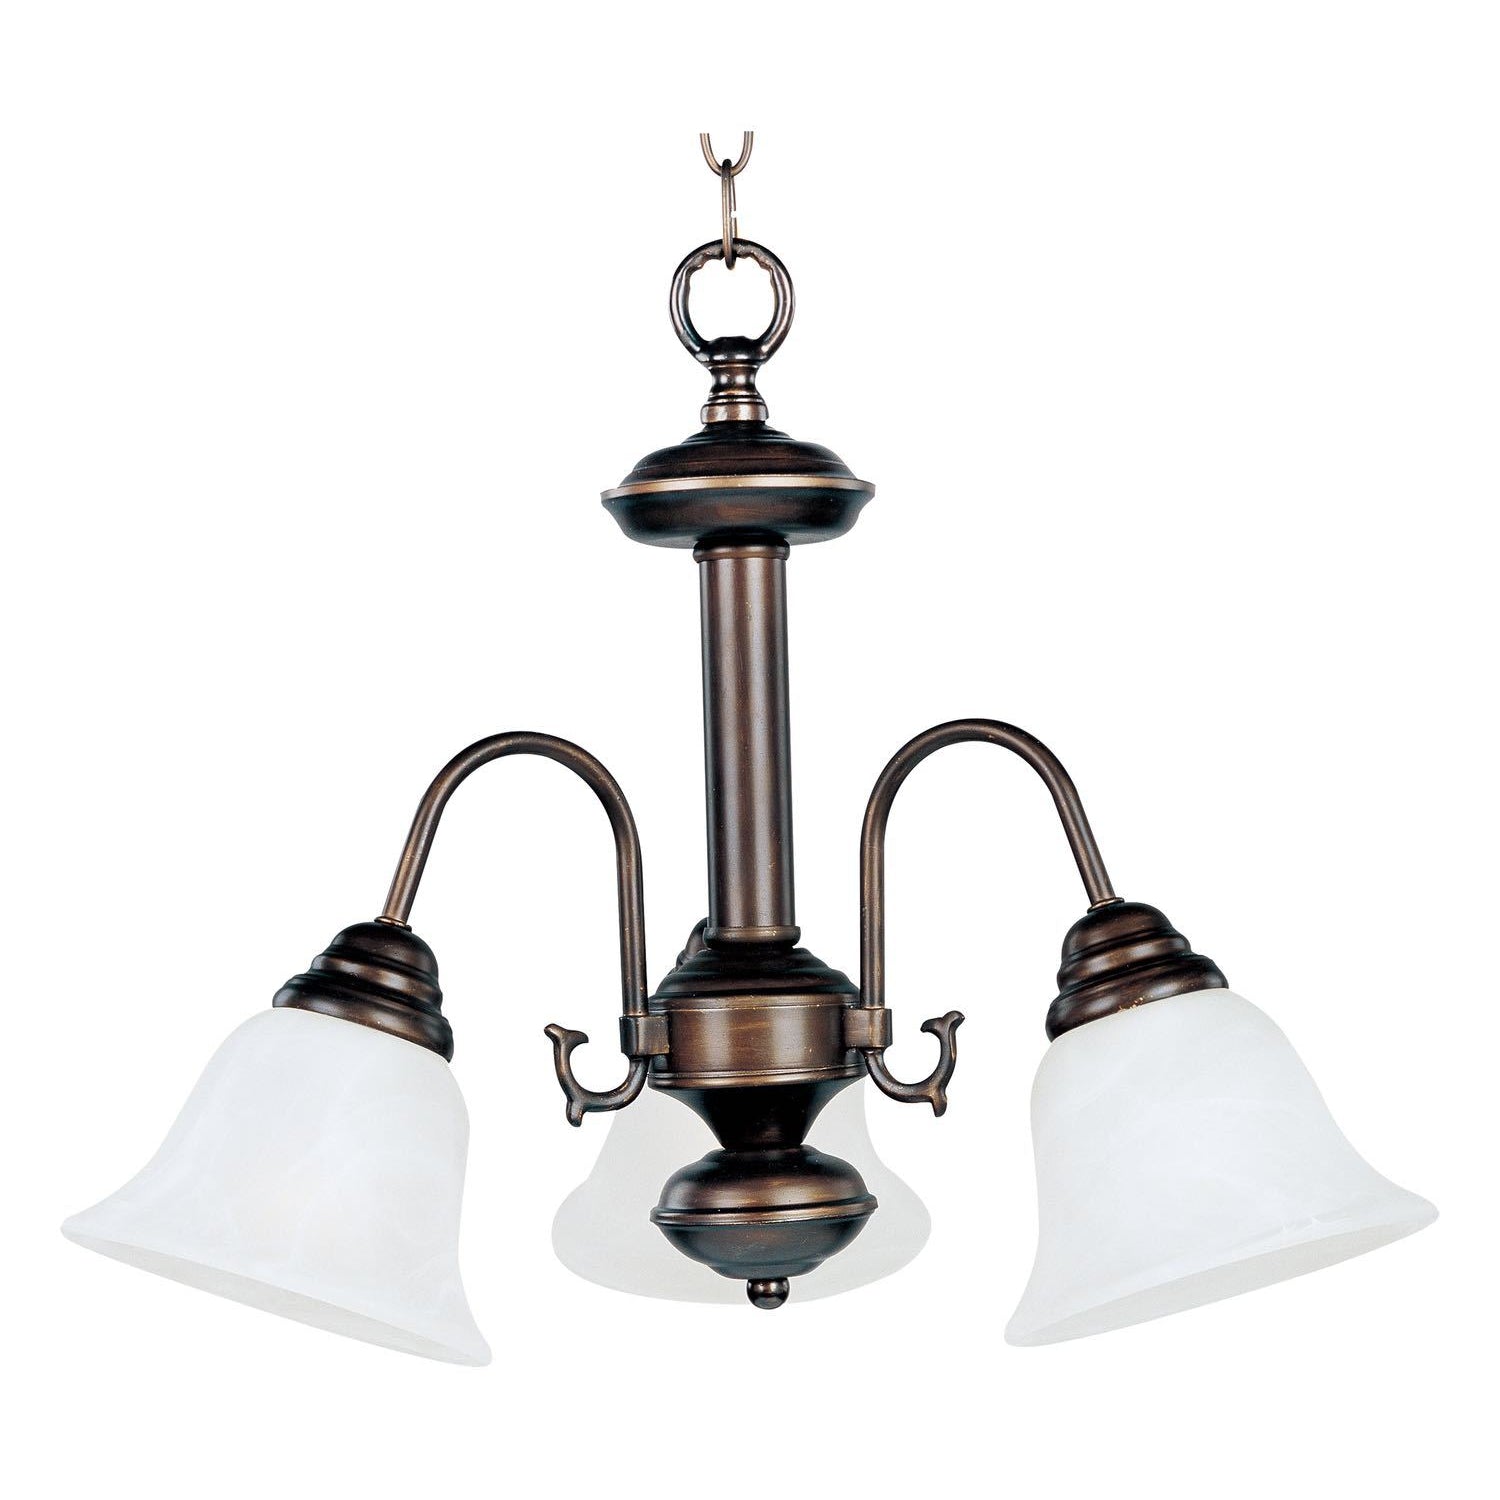 Malaga Chandelier Oil Rubbed Bronze | Marble